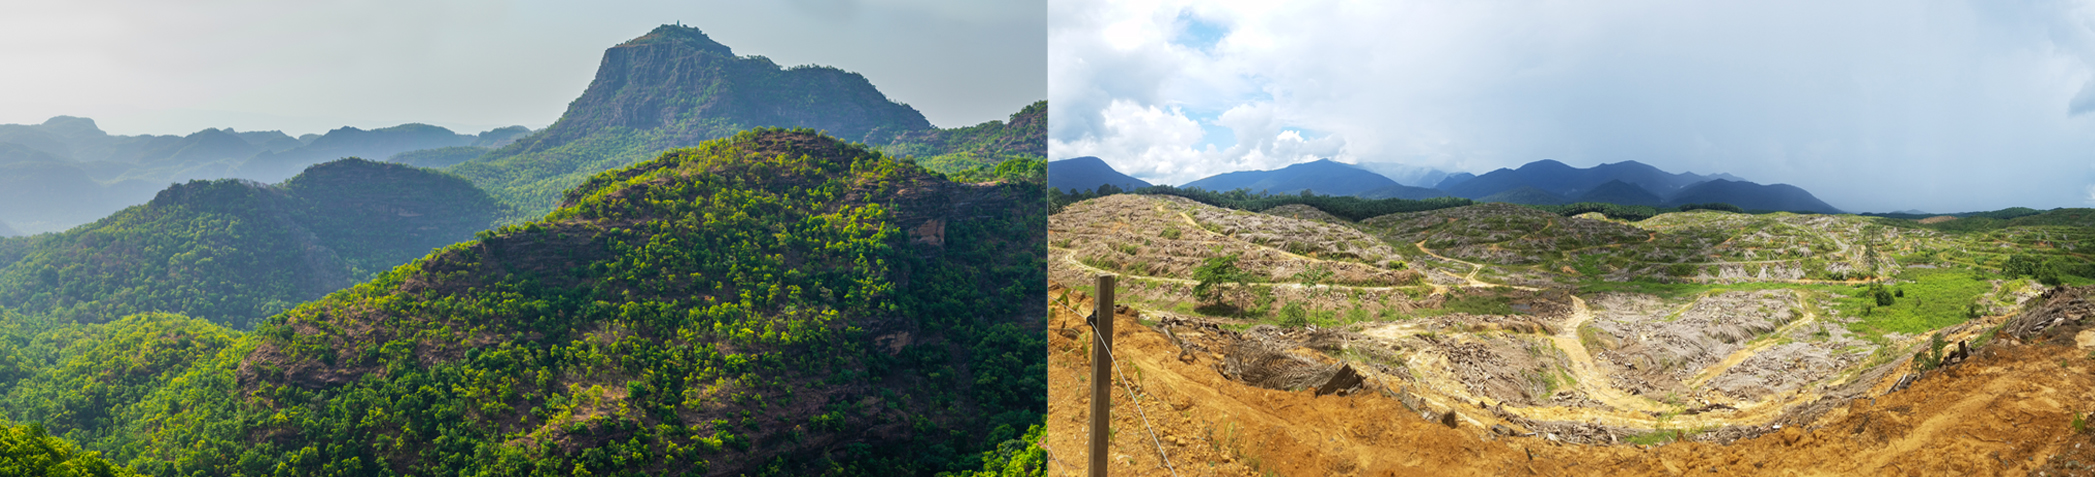 comparison of forest and deforested land